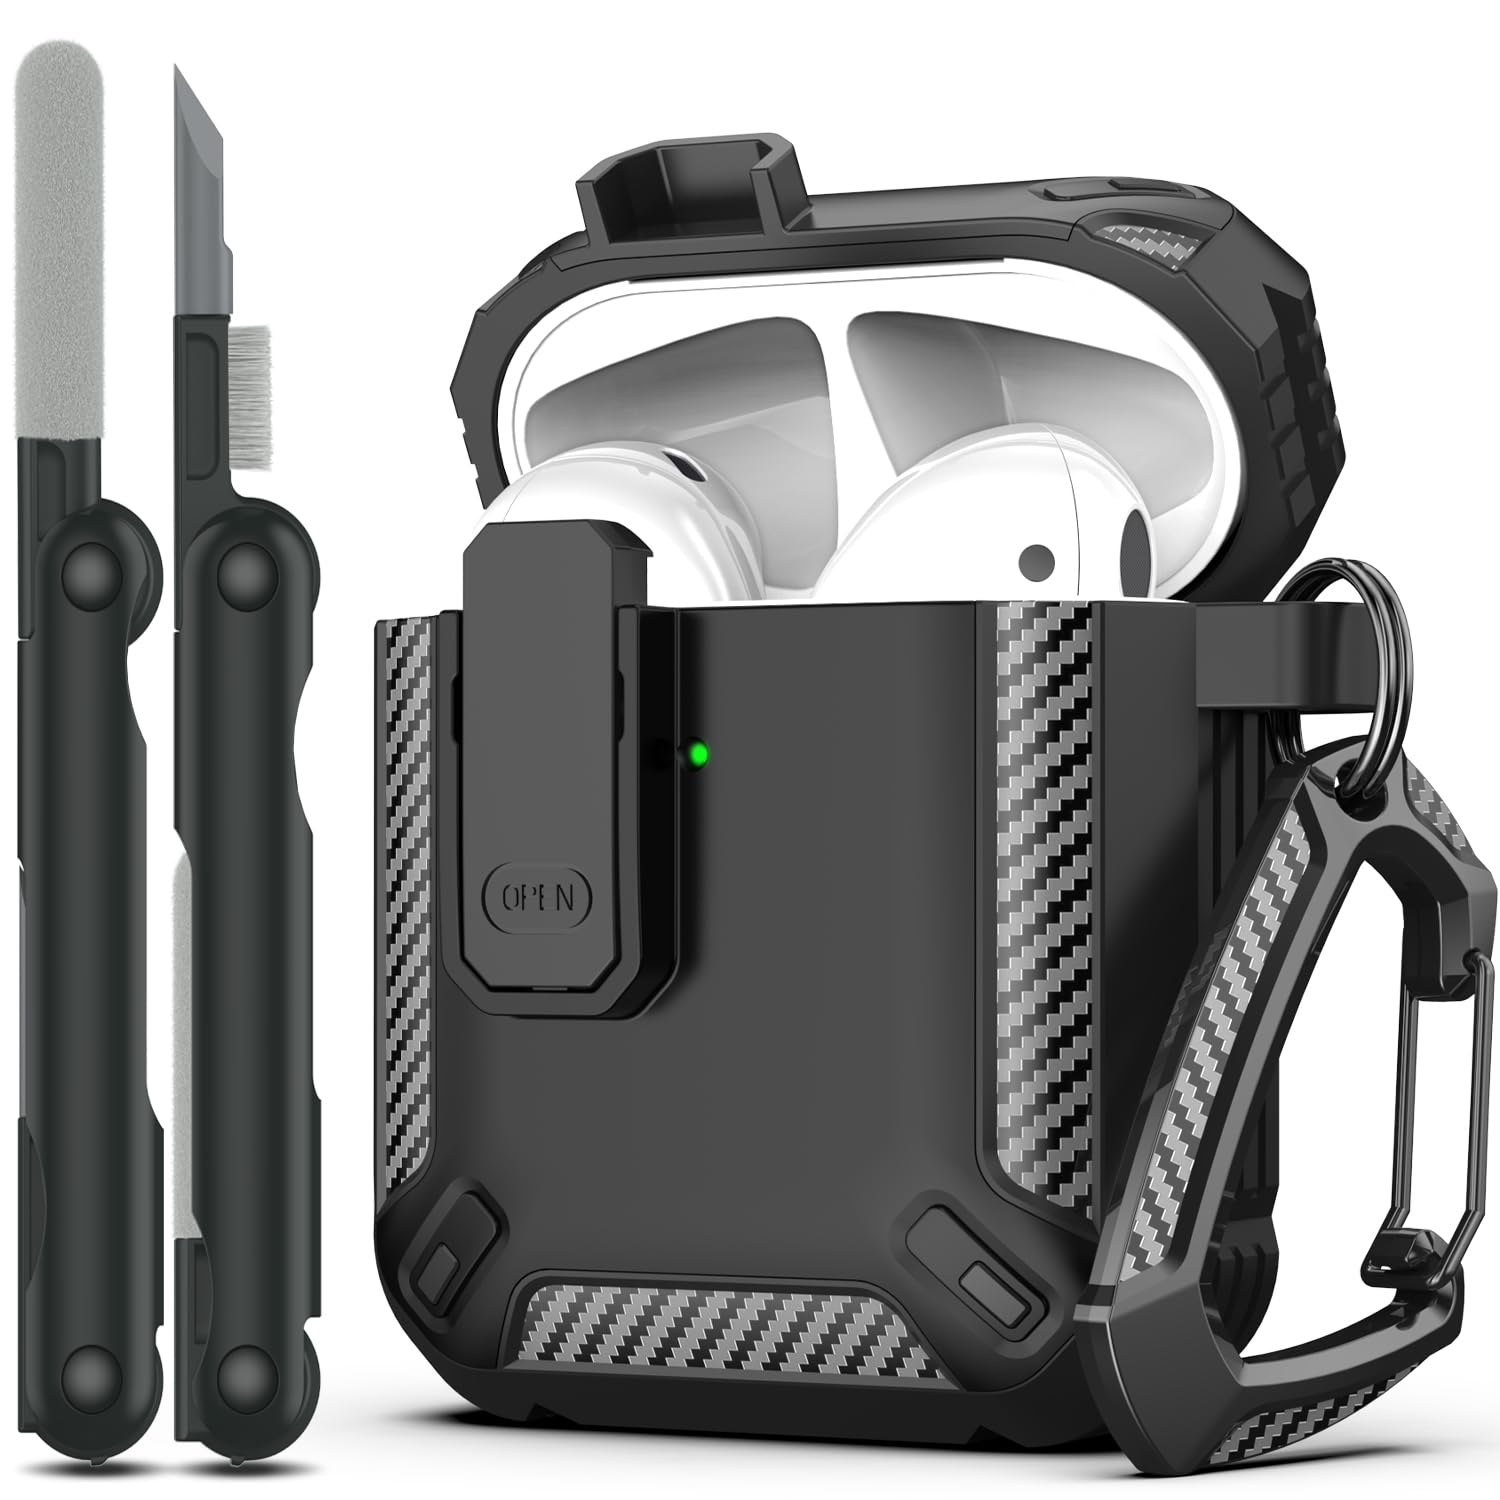 RFUNGUANGO AirPods 2nd Generation Case Cover with Cleaner Kit, Military Hard Shell Protective Armor with Lock for AirPod Gen 1&2 Charging Case, Front LED Visible,Black - Caps Fitted